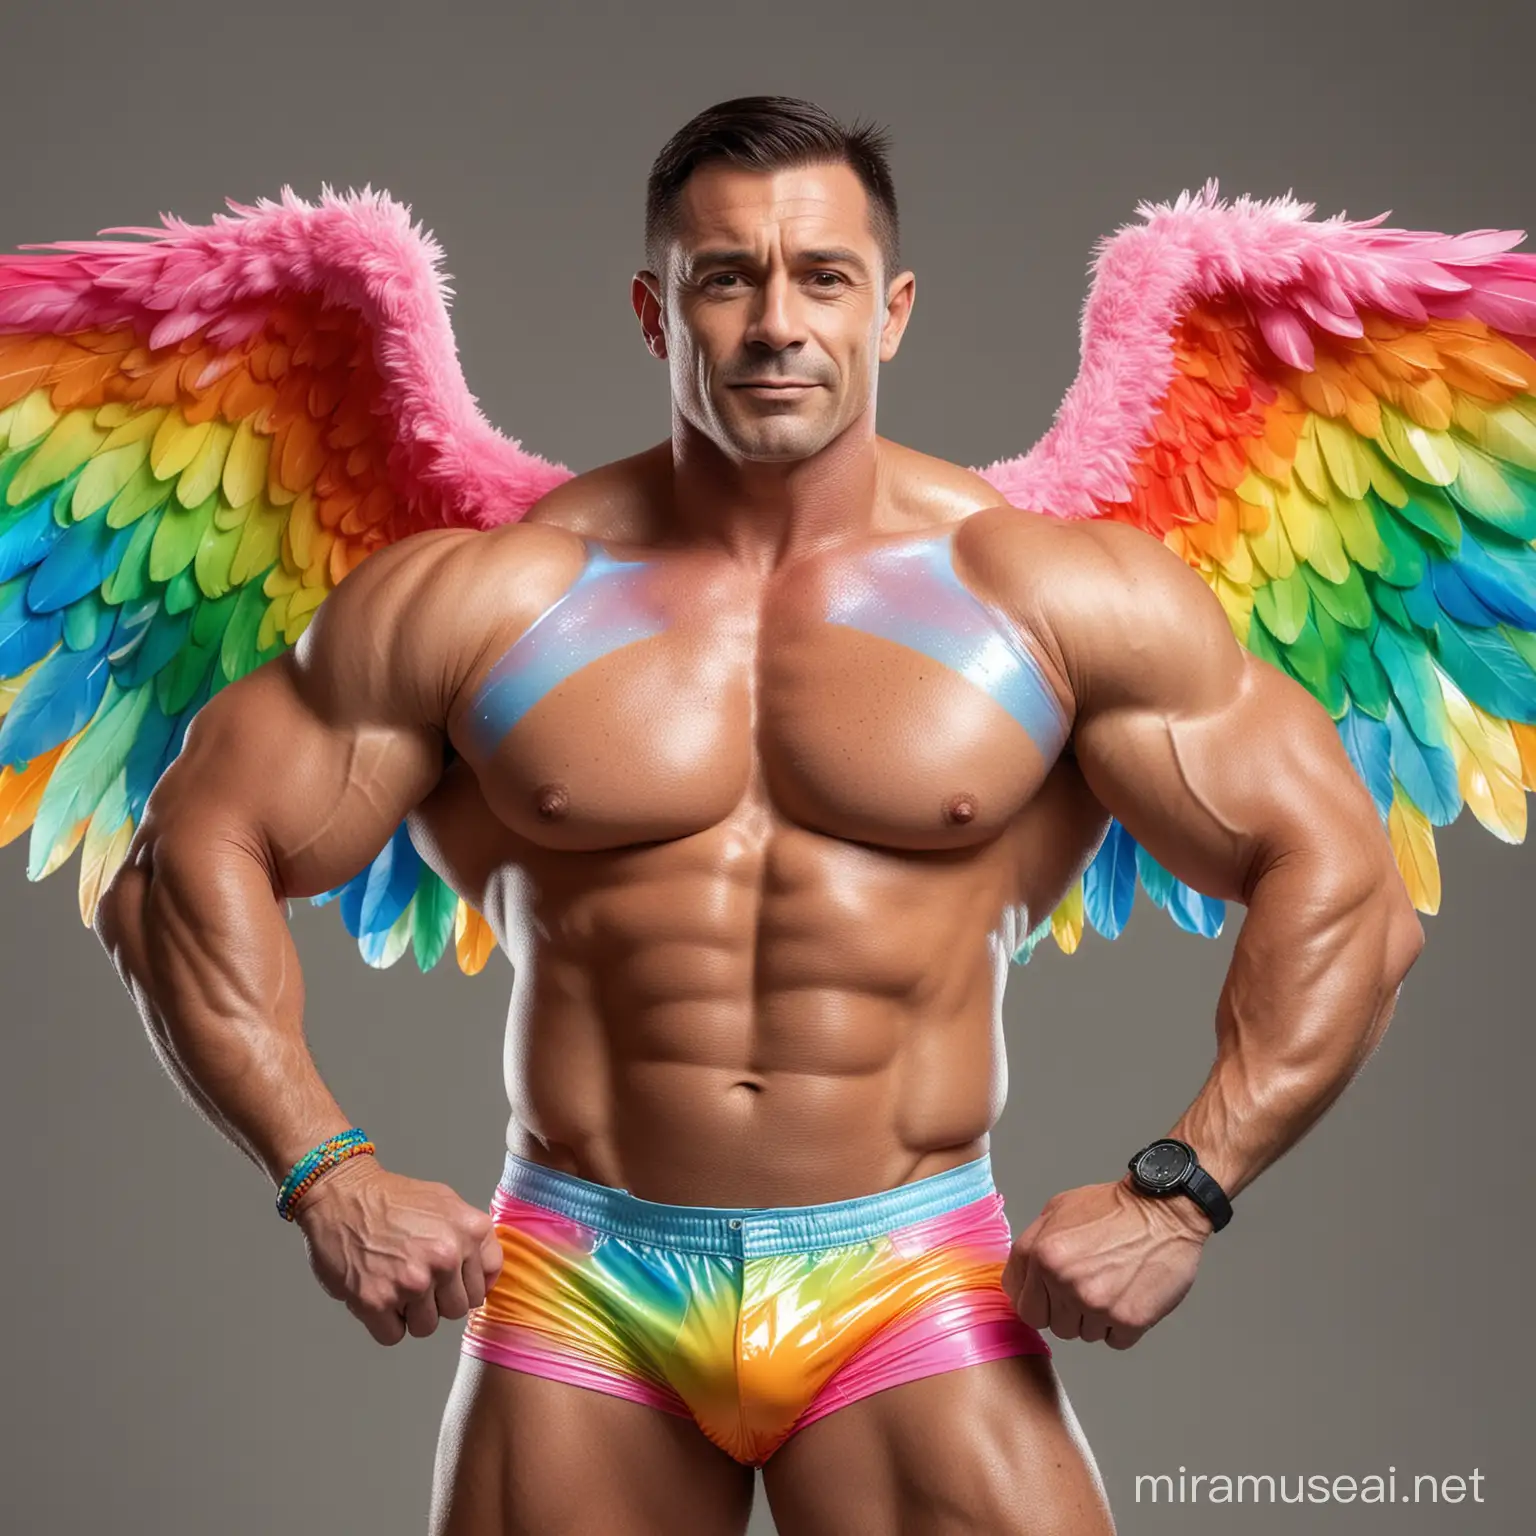 Topless 40s Ultra Beefy IFBB Bodybuilder Man wearing Multi-Highlighter Bright Rainbow Coloured See Through Eagle Wings shoulder Jacket short shorts and Flexing Big Strong Arm with Doraemon